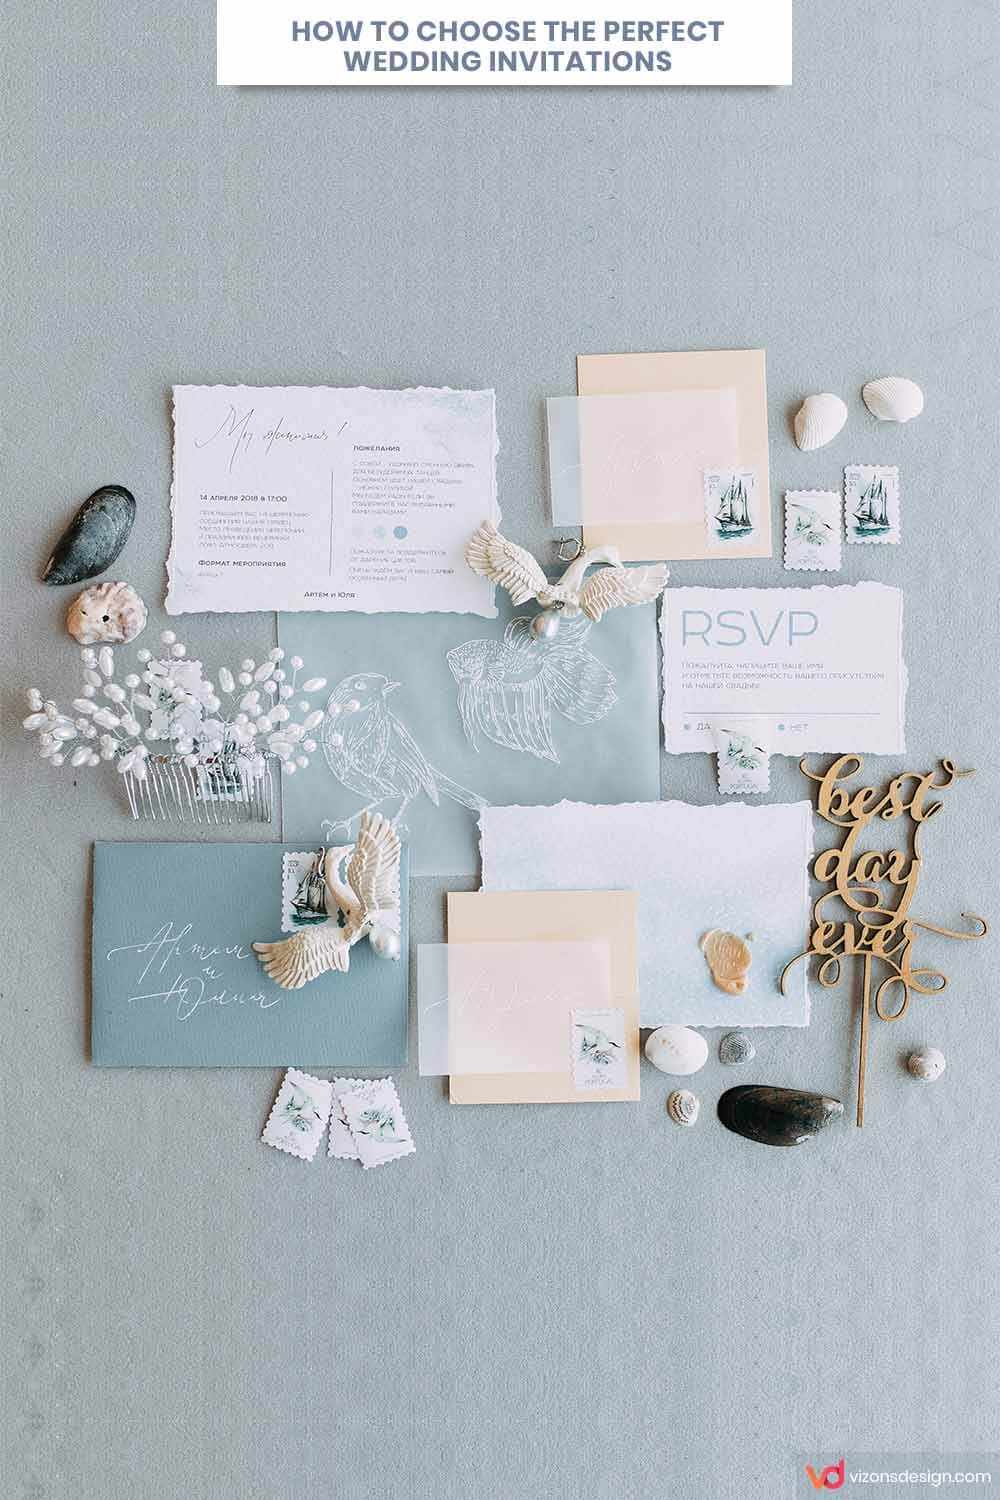 How To Choose The Perfect Wedding Invitations